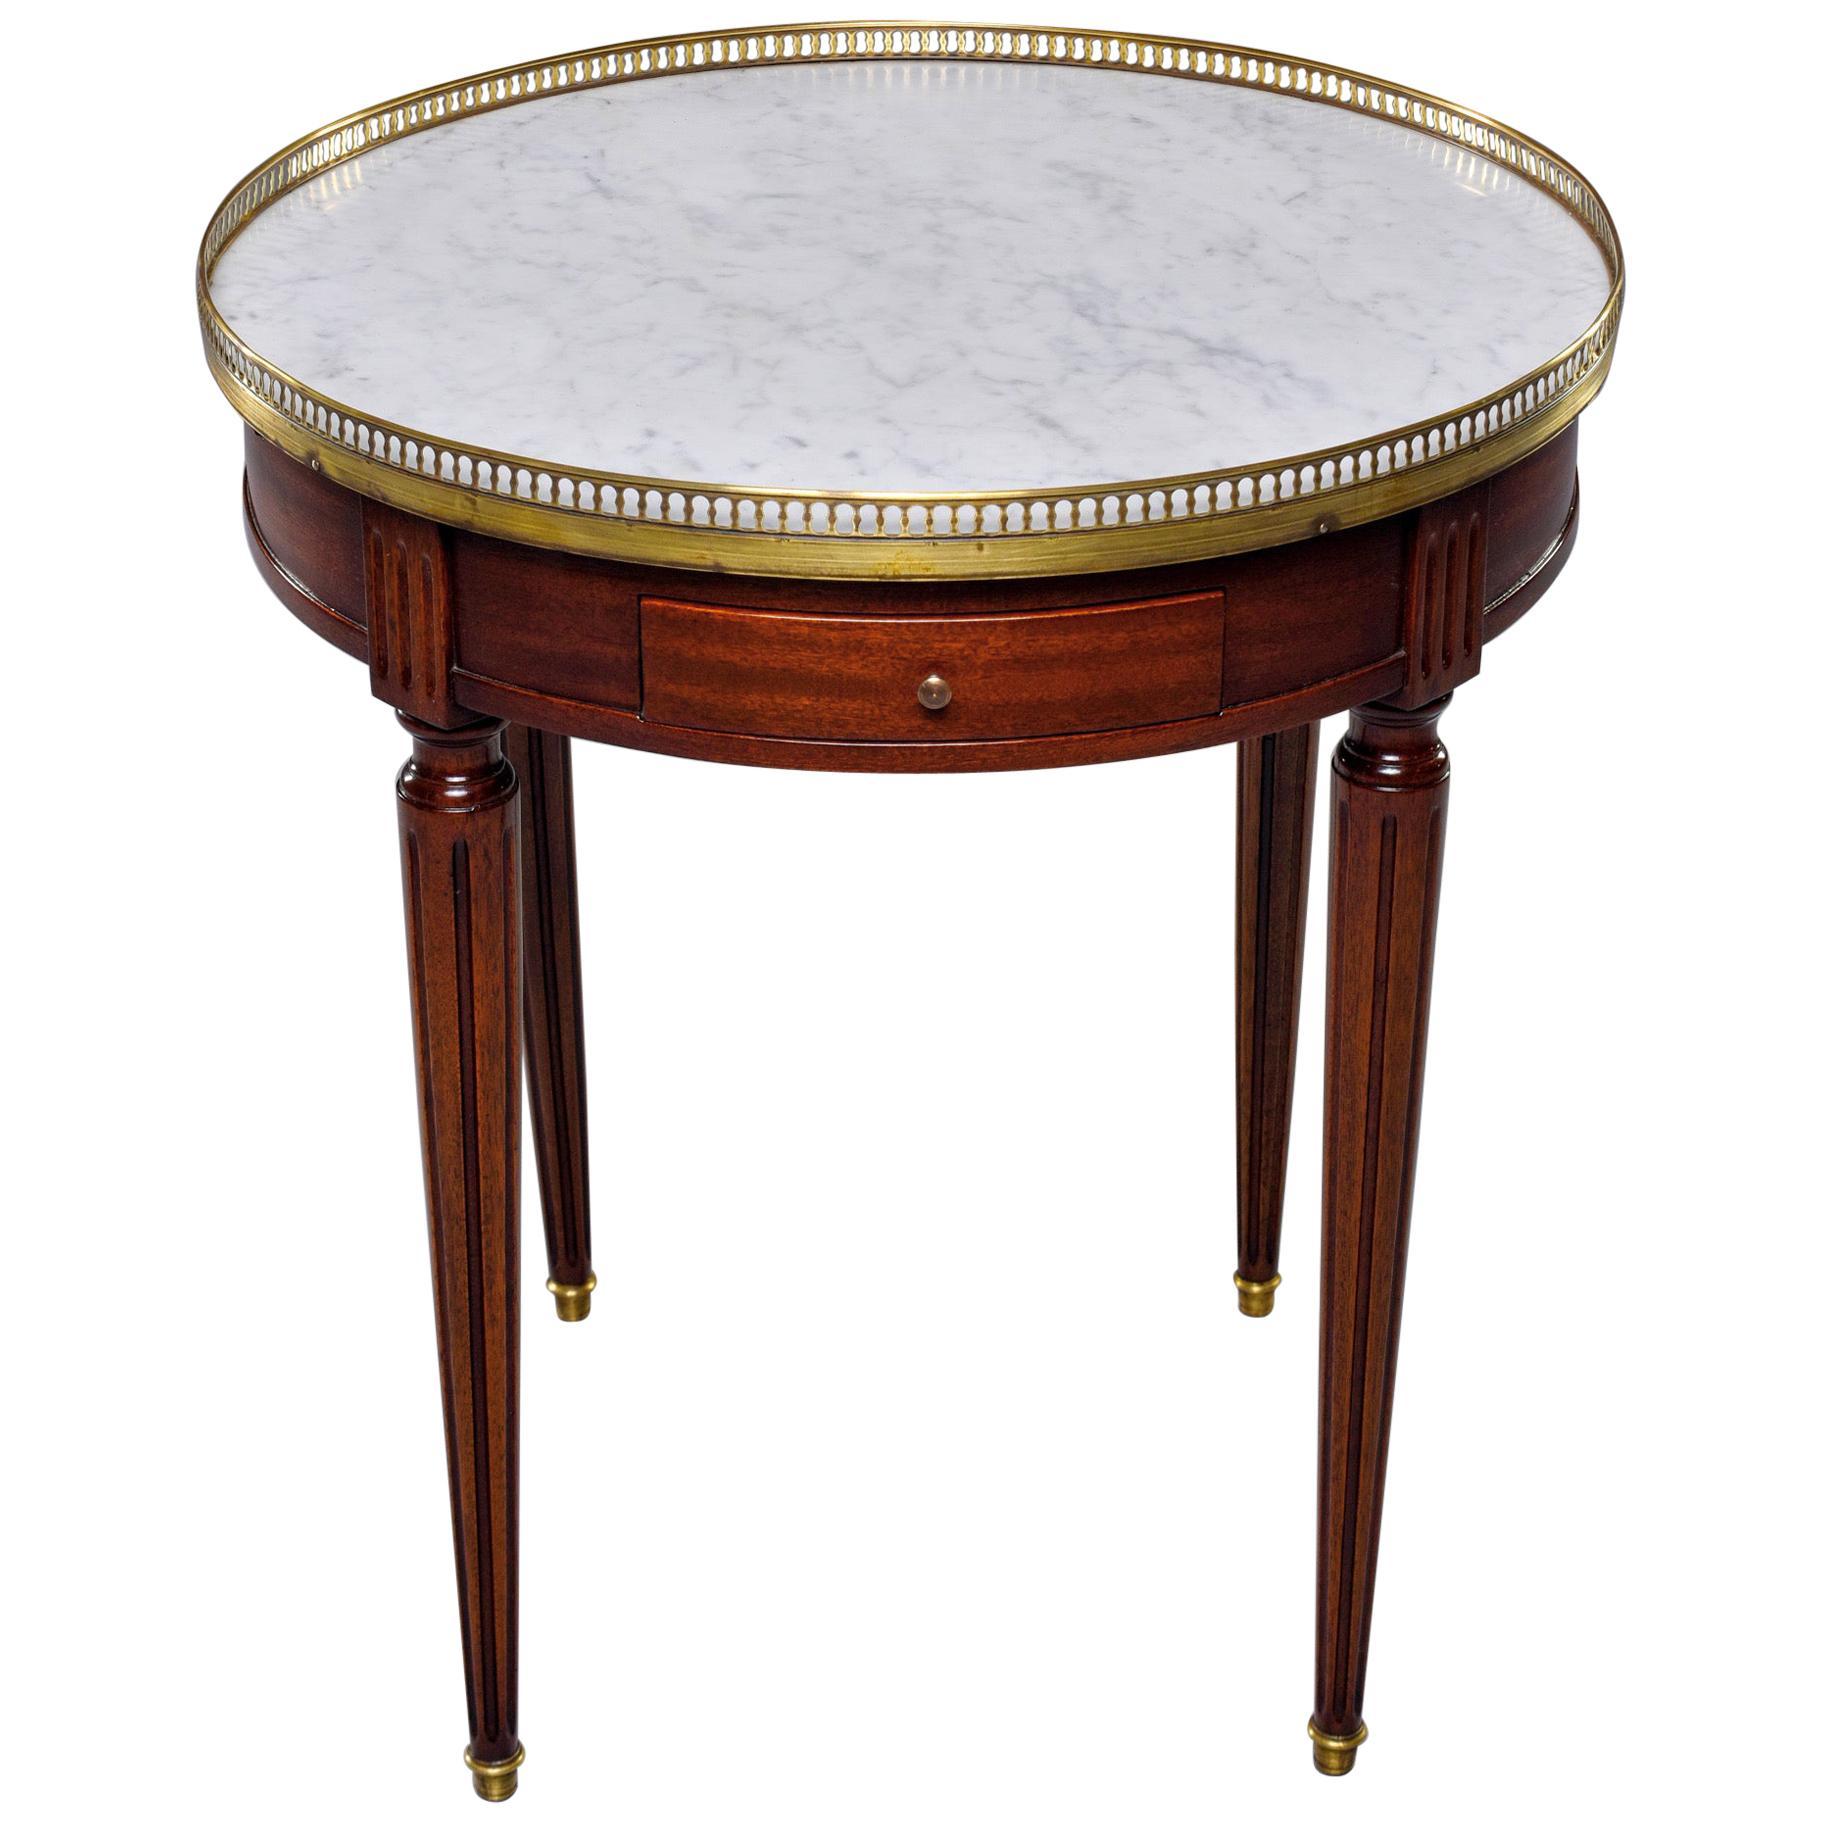 Louis XVI Style Brass Bound Table with White Marble Top